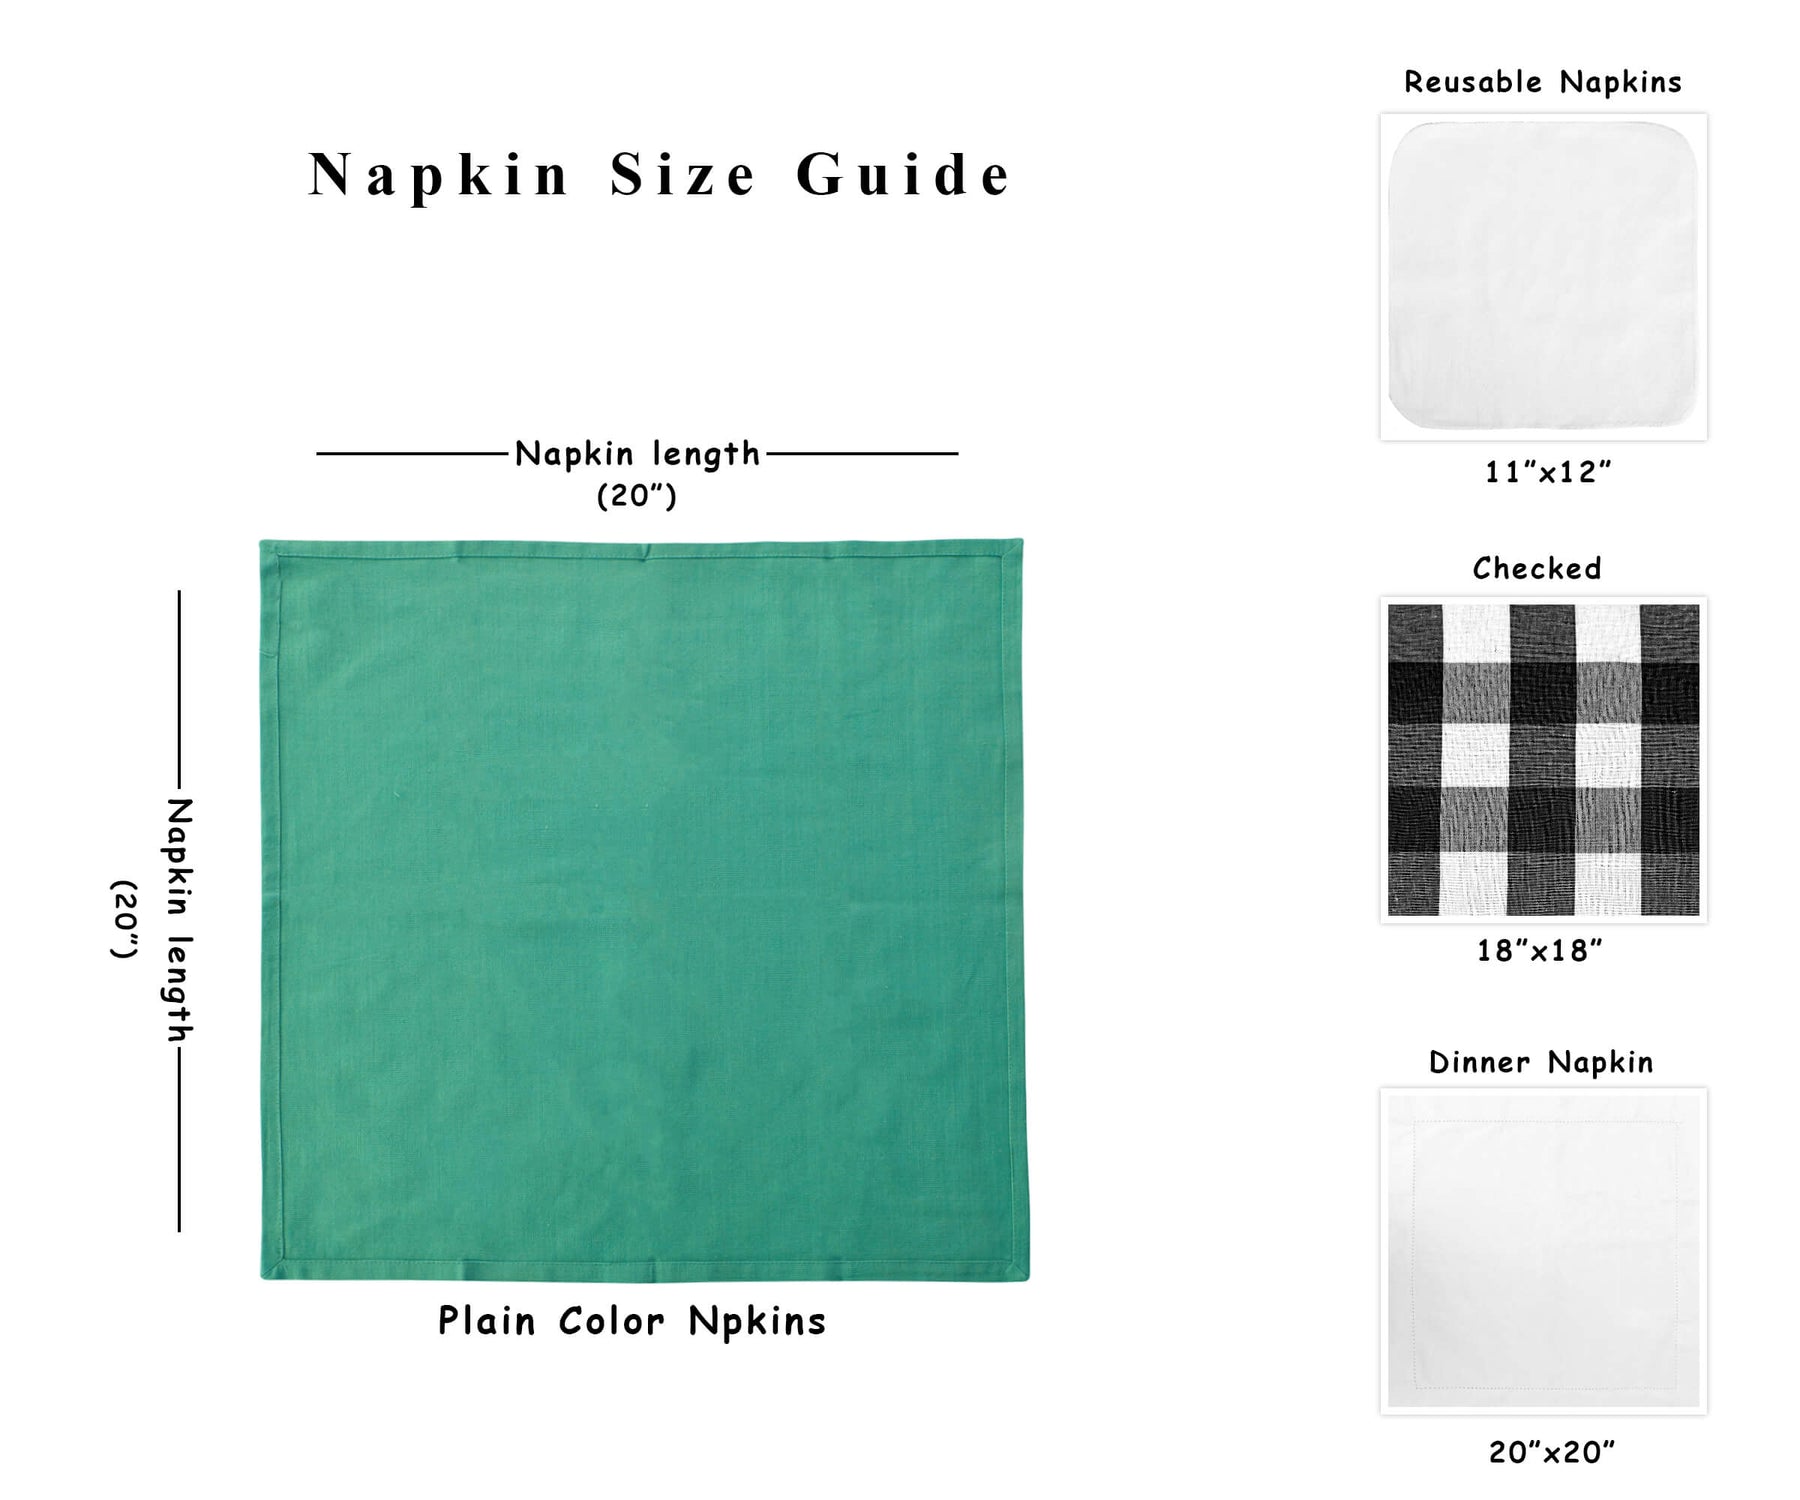 A napkins cloth washable with the dimension of 20x20" is shown color napkins